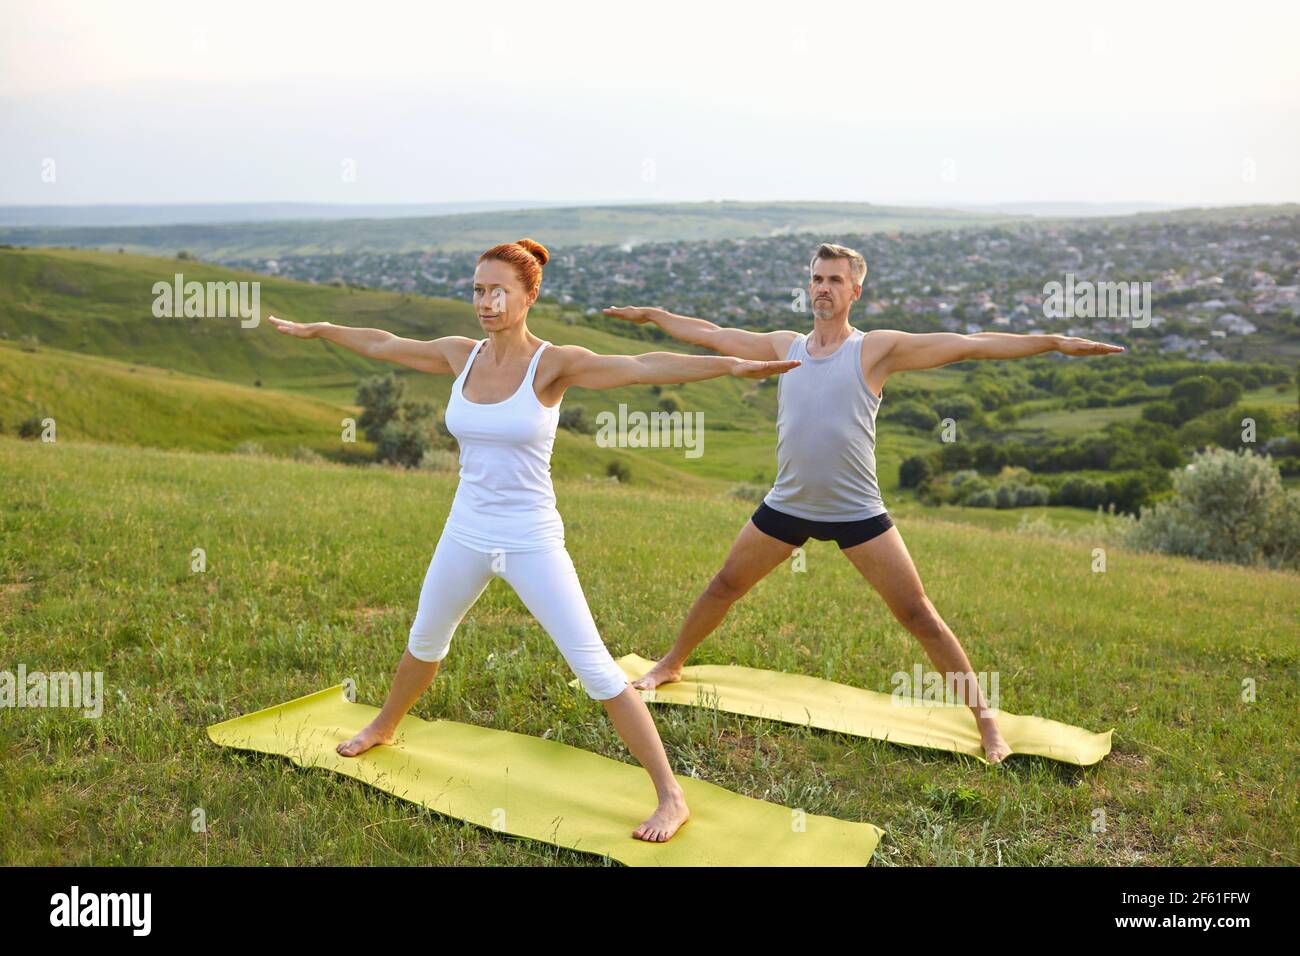 Middle aged couple doing Five Pointed Star asana while practicing yoga together on grassy hill Stock Photo